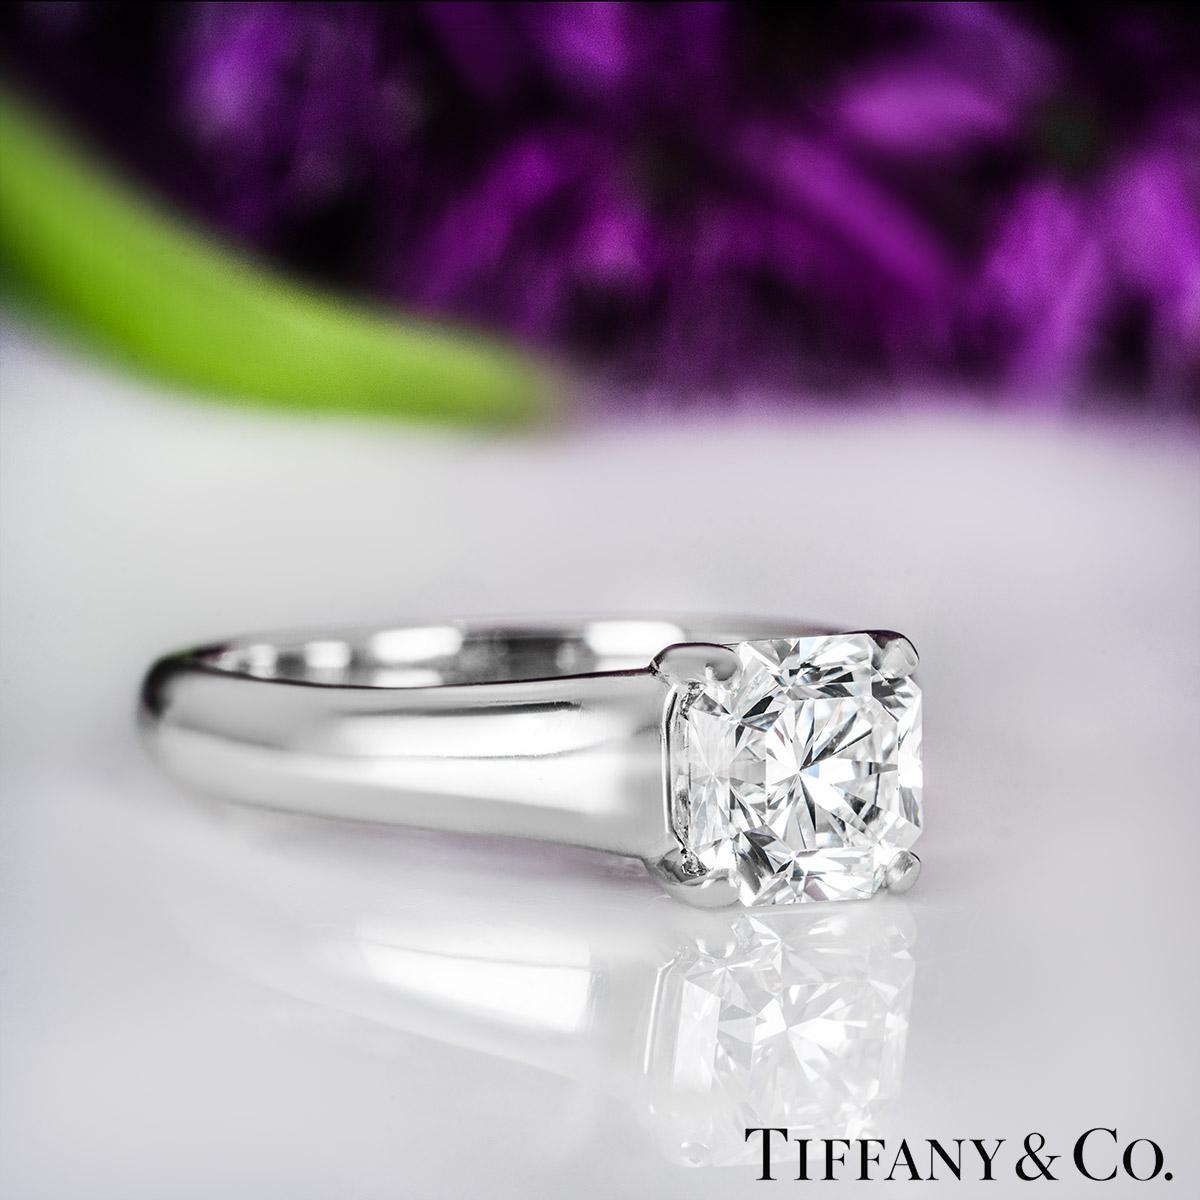 Mixed Cut Tiffany & Co. Lucida Cut Diamond Solitaire Ring 1.27 Carat GIA Certified For Sale